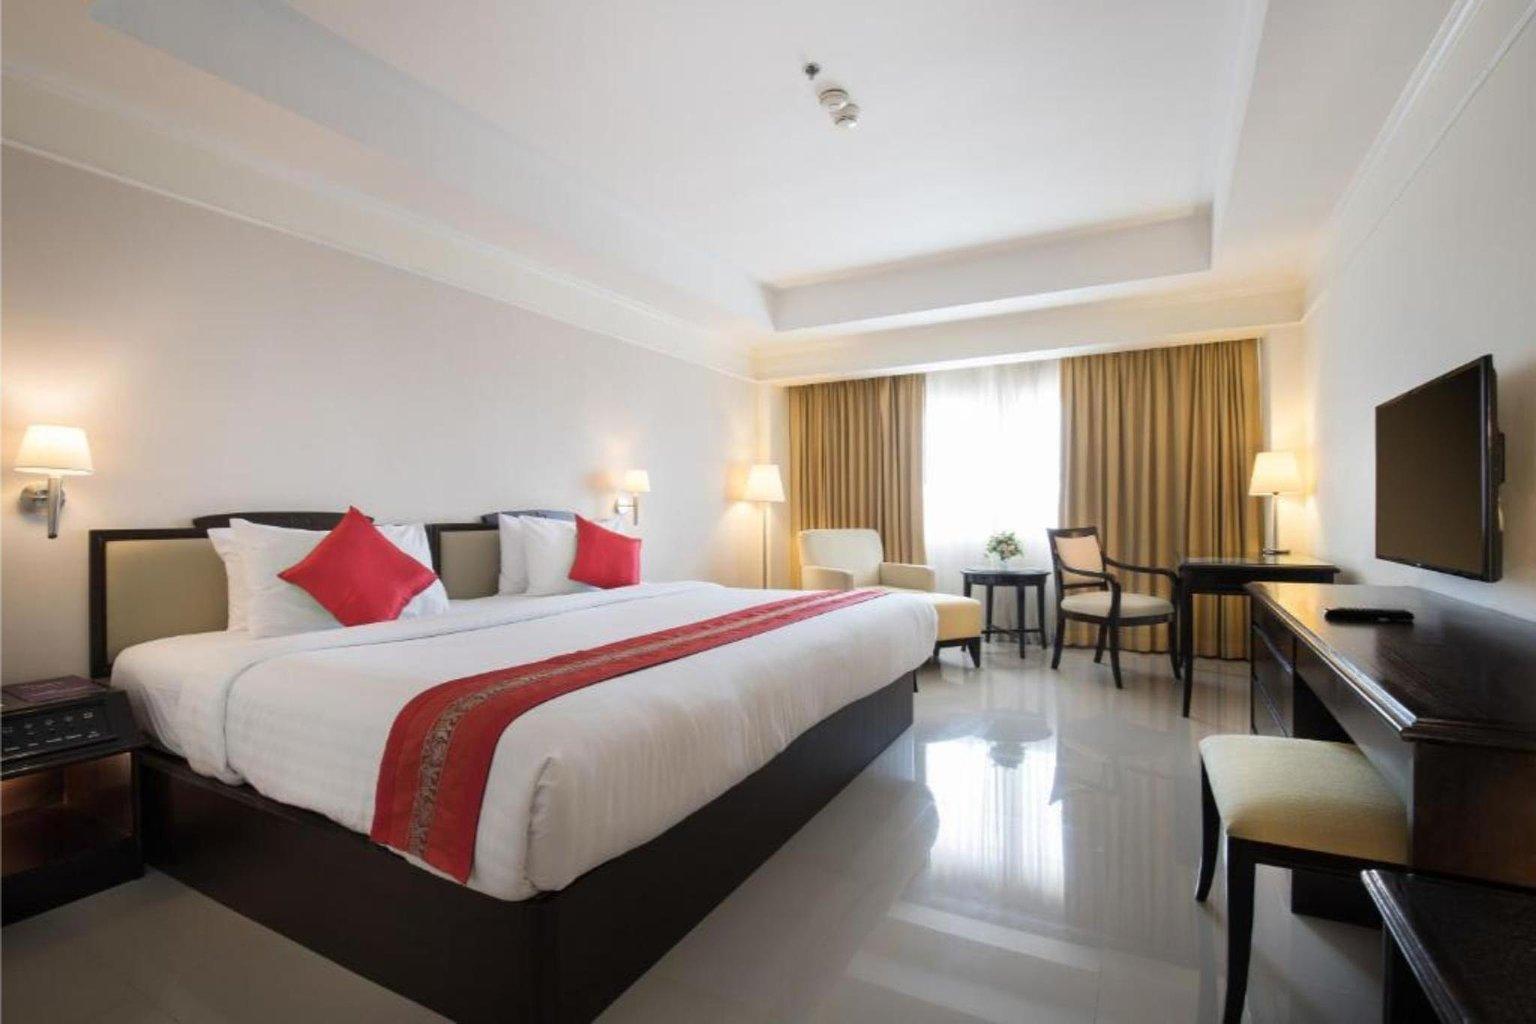 Deluxe Room with 1 king size bed - Mercure Chiang Mai